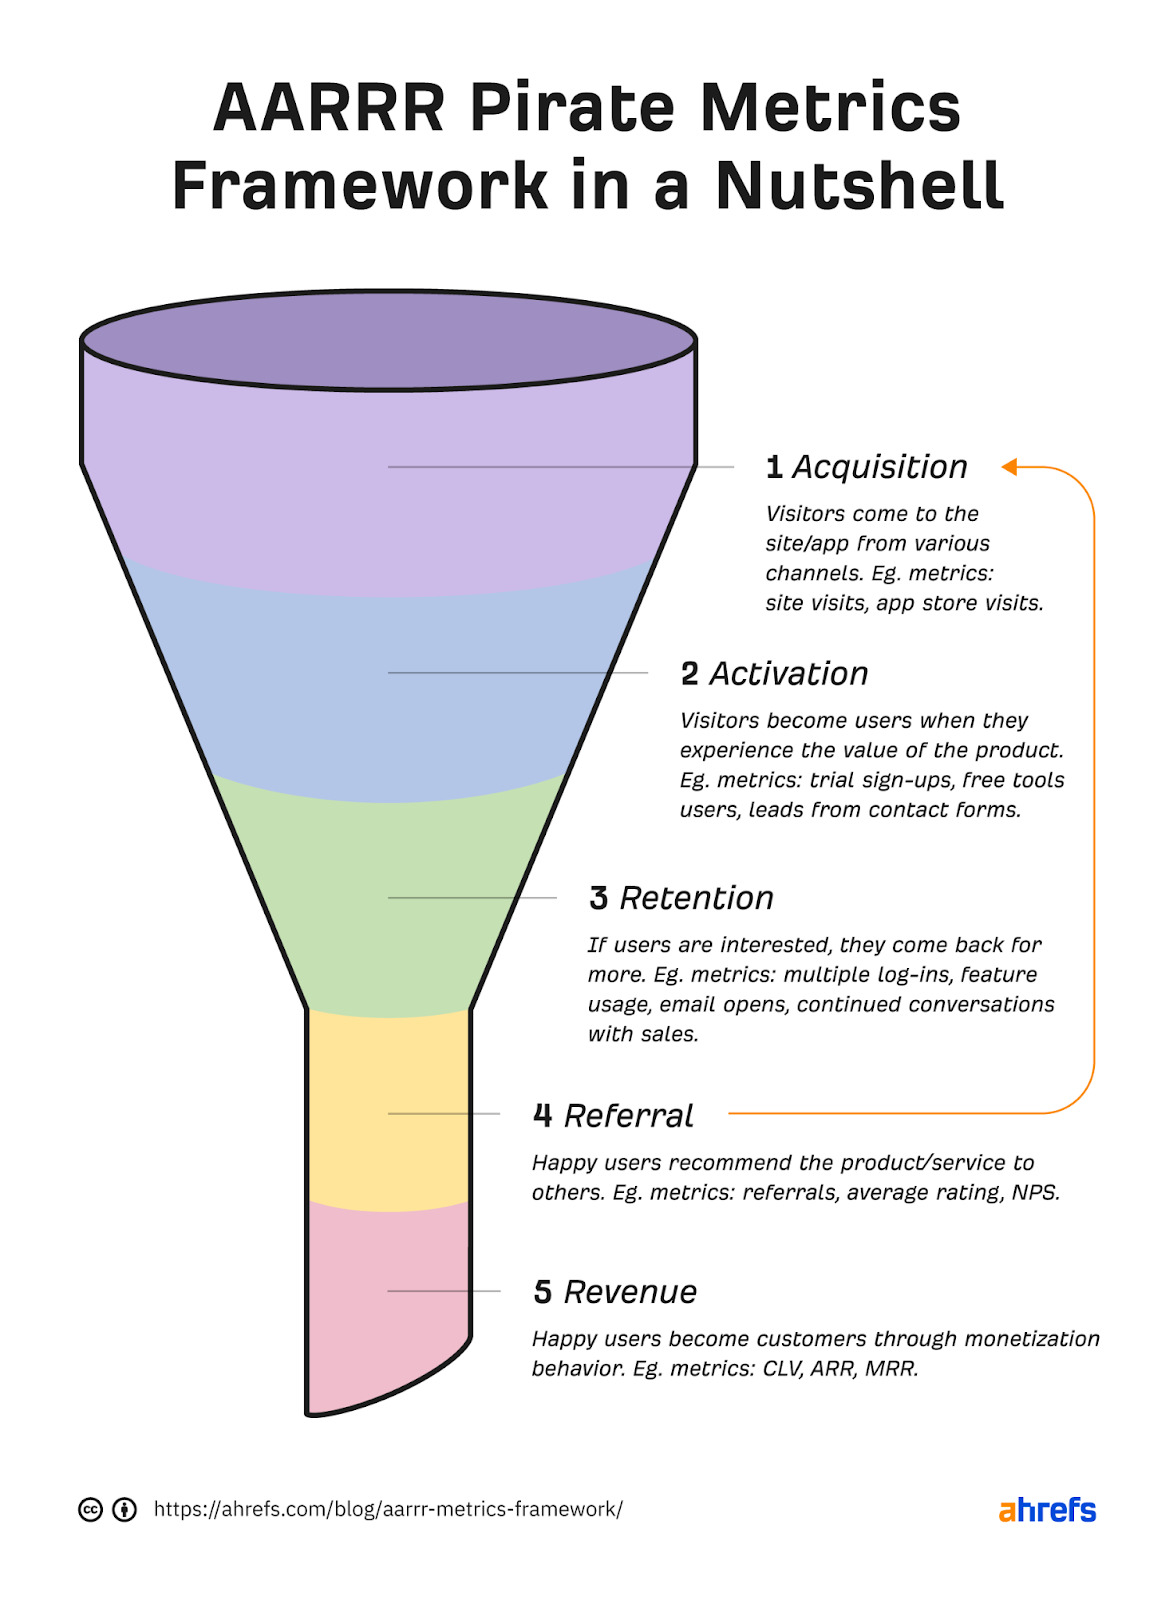 AARRR funnel. From top to bottom (acquisition, activation, retention, referral, revenue). Arrow pointing from referral to acquisition 